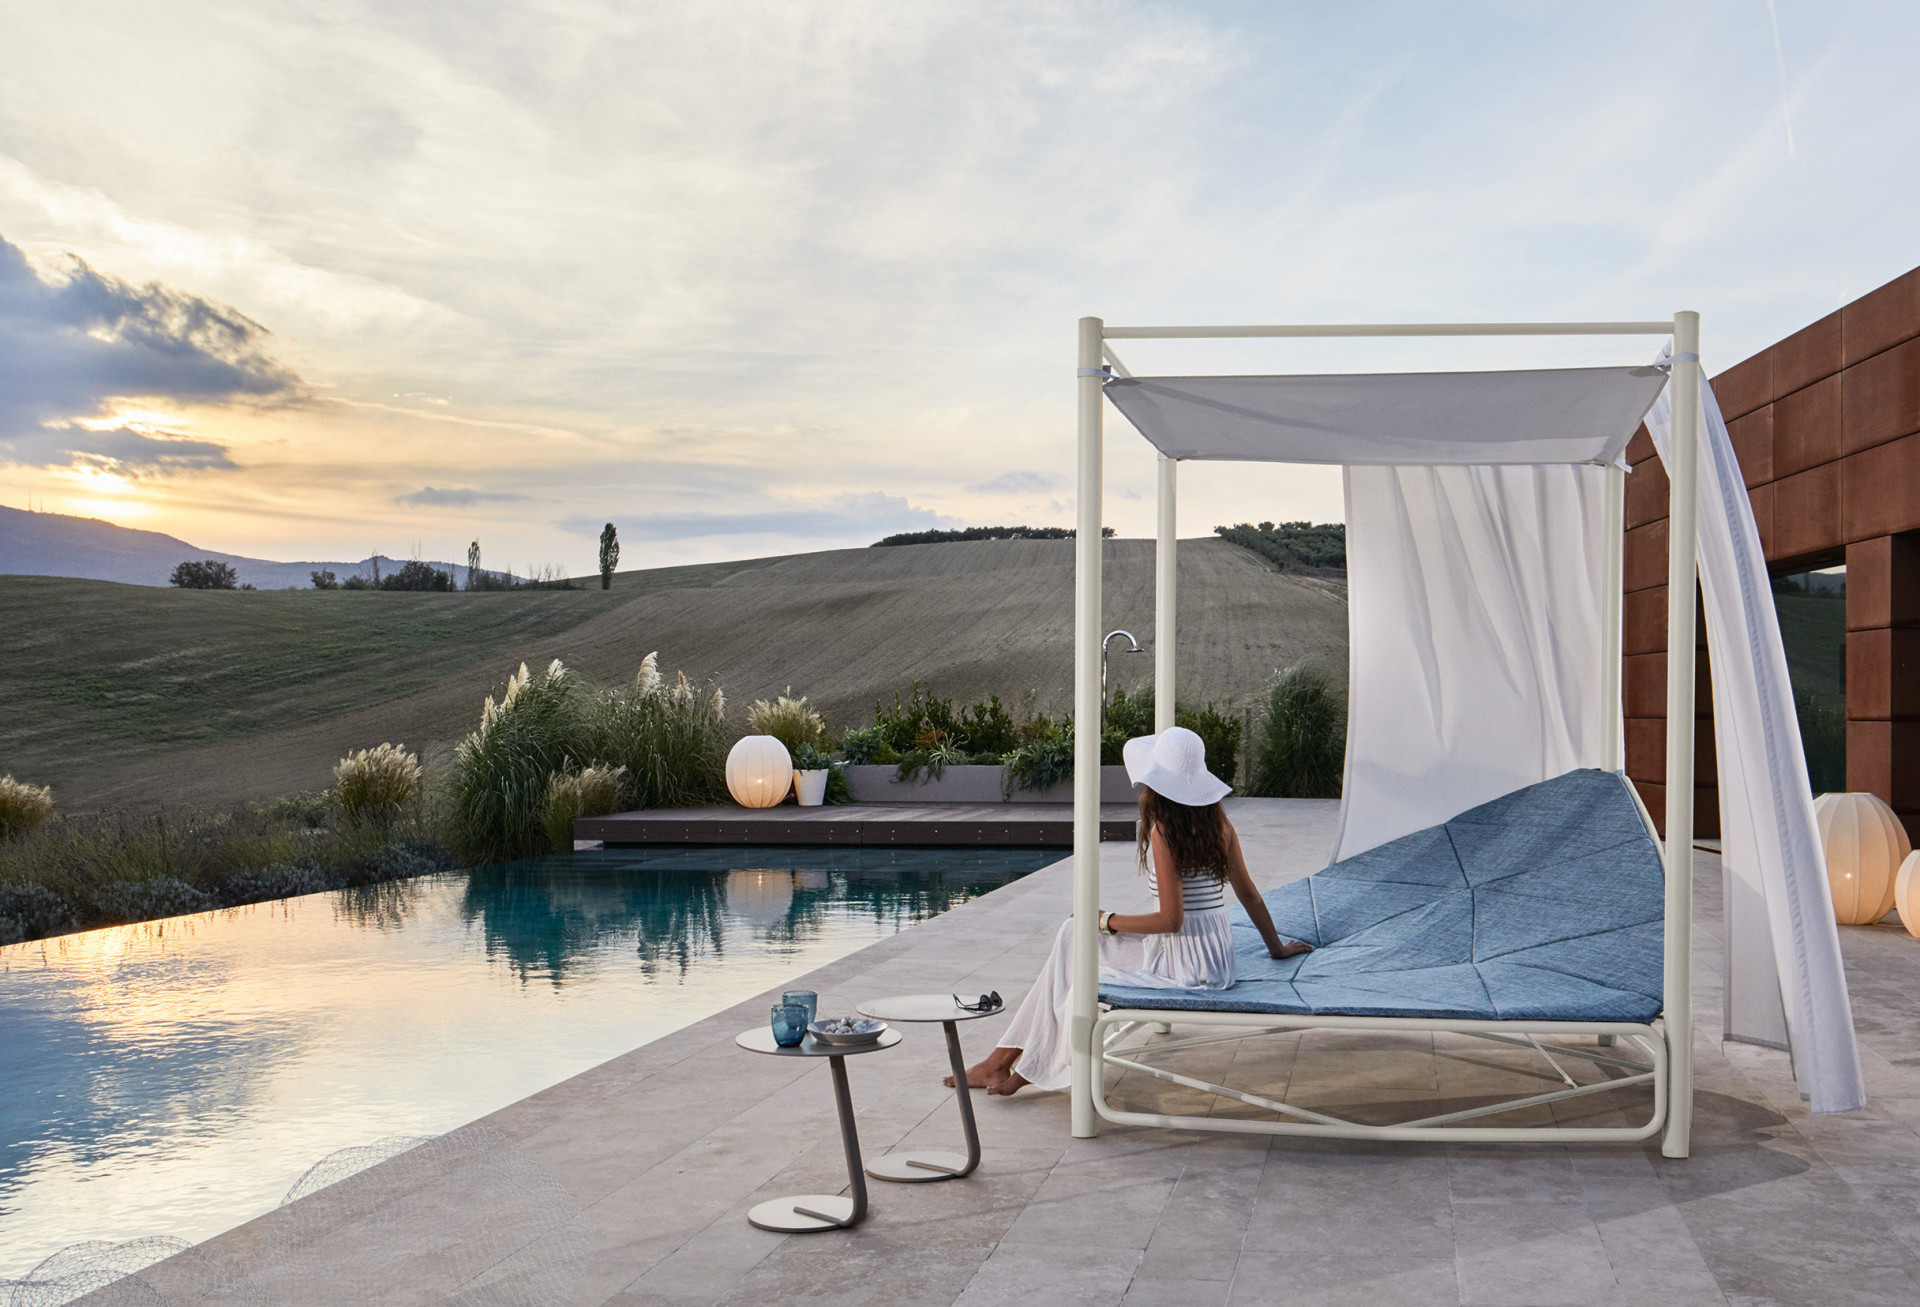 A luxurious outdoor swimming pool daybed placed adjacent to a lush green field, offering a serene and elegant setting for relaxation and enjoyment.